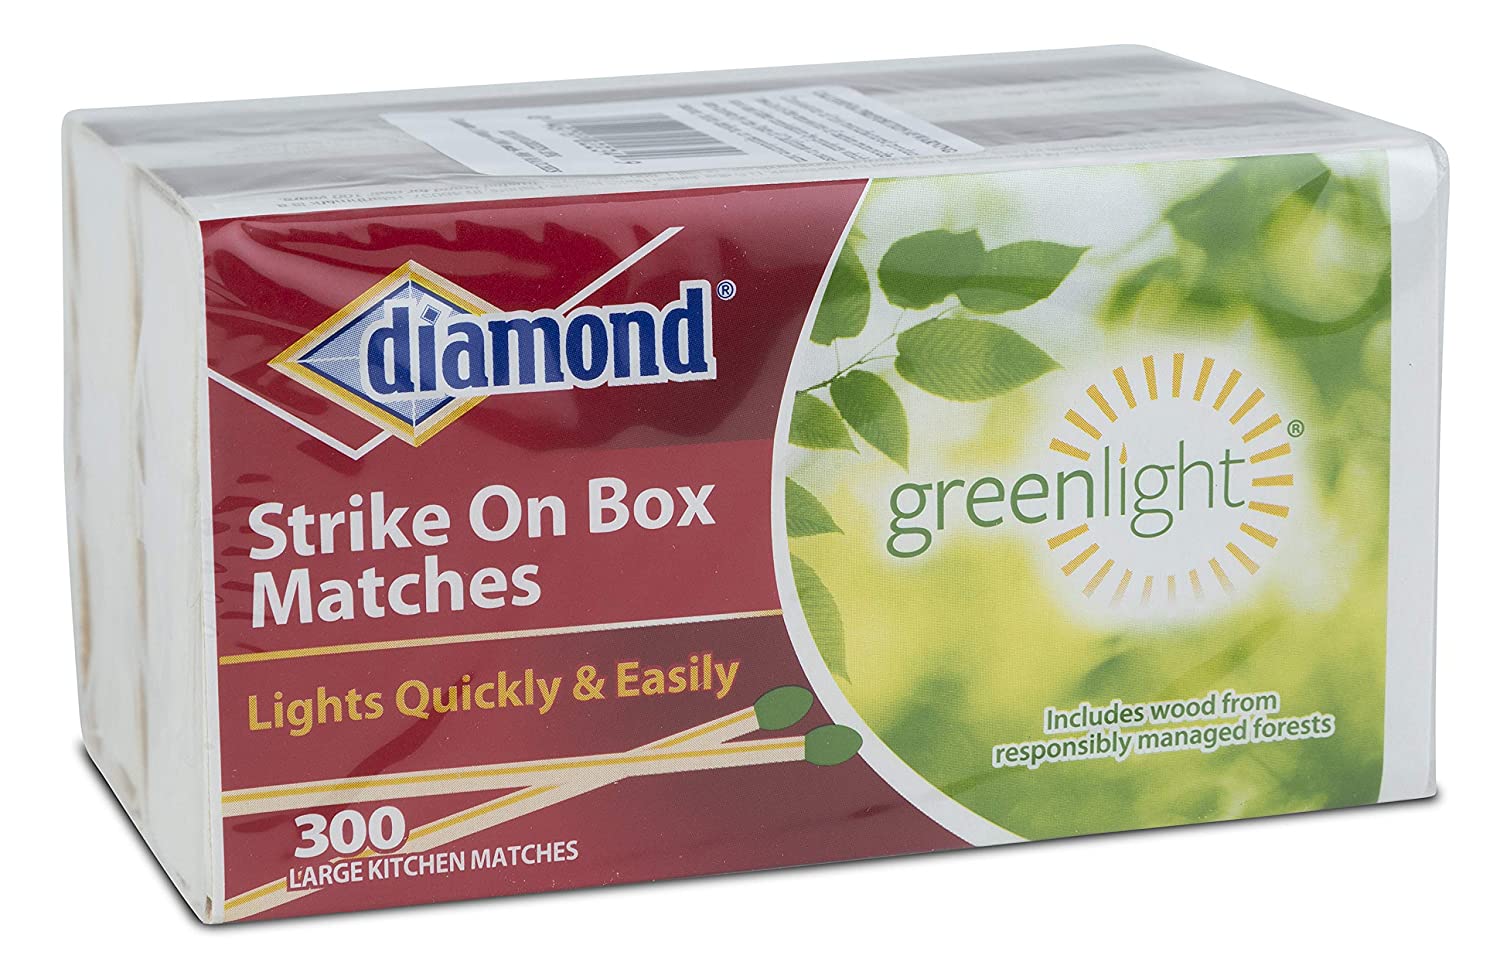 [30 Pack] Wooden Strike on Box Matches - 240 Count Per Box - Kitchen  Matches, Camping, Candles and Stove - Lot Bulk, Wholesale